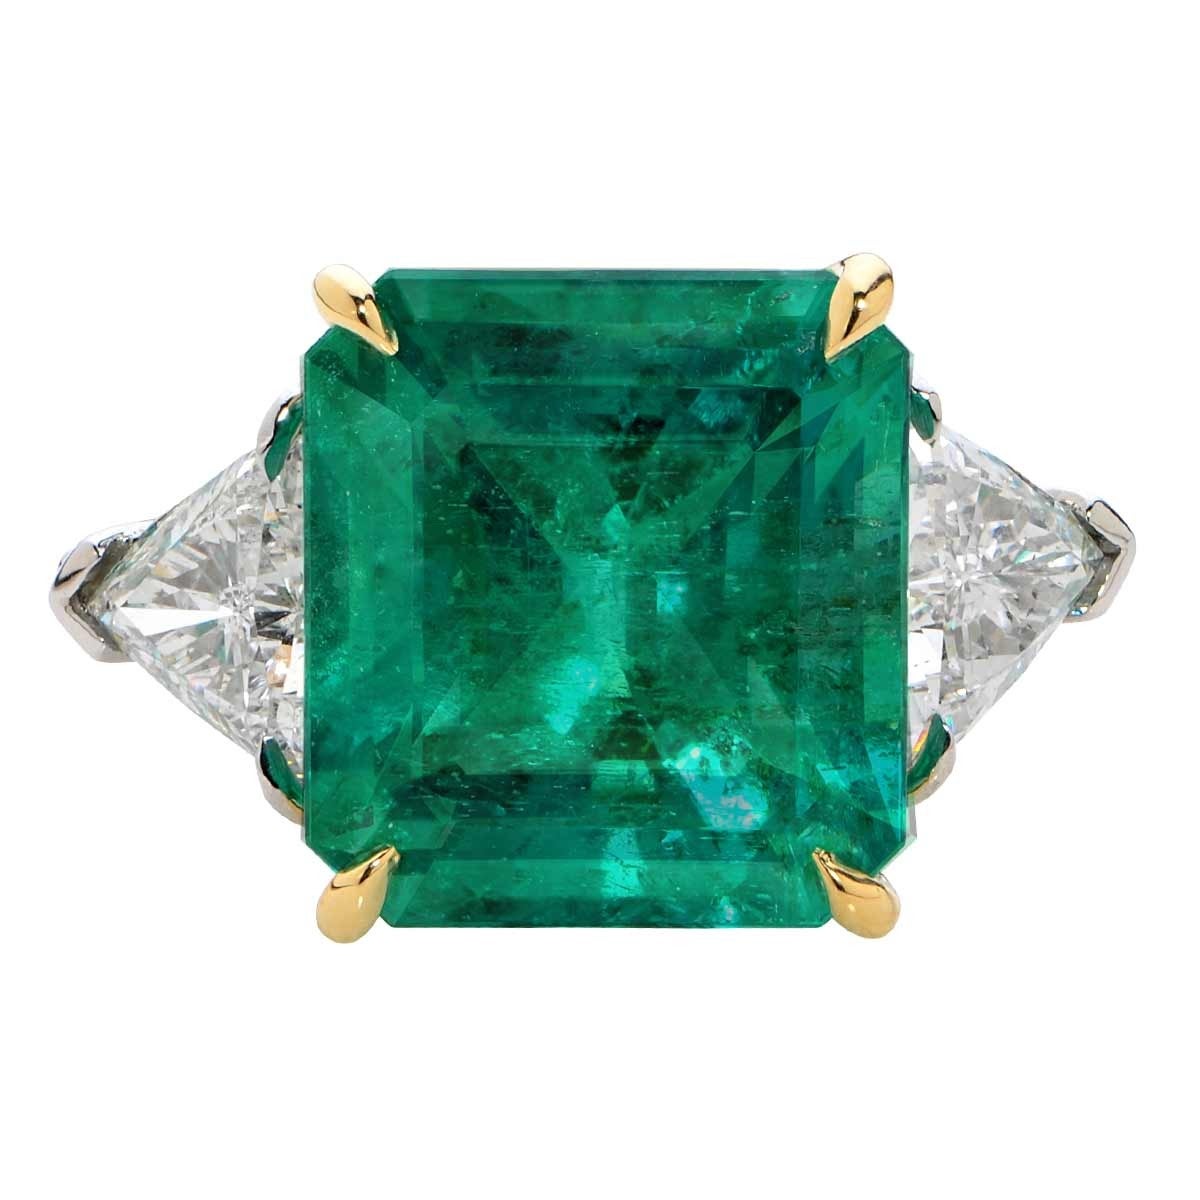 This Impressive 11.39 Carat GIA Certified Colombian Emerald is set into a Platinum Ring and is Flanked by Two Trillion Cut Diamonds with a Total Weight of 2.11cts F Color, VS Clarity.